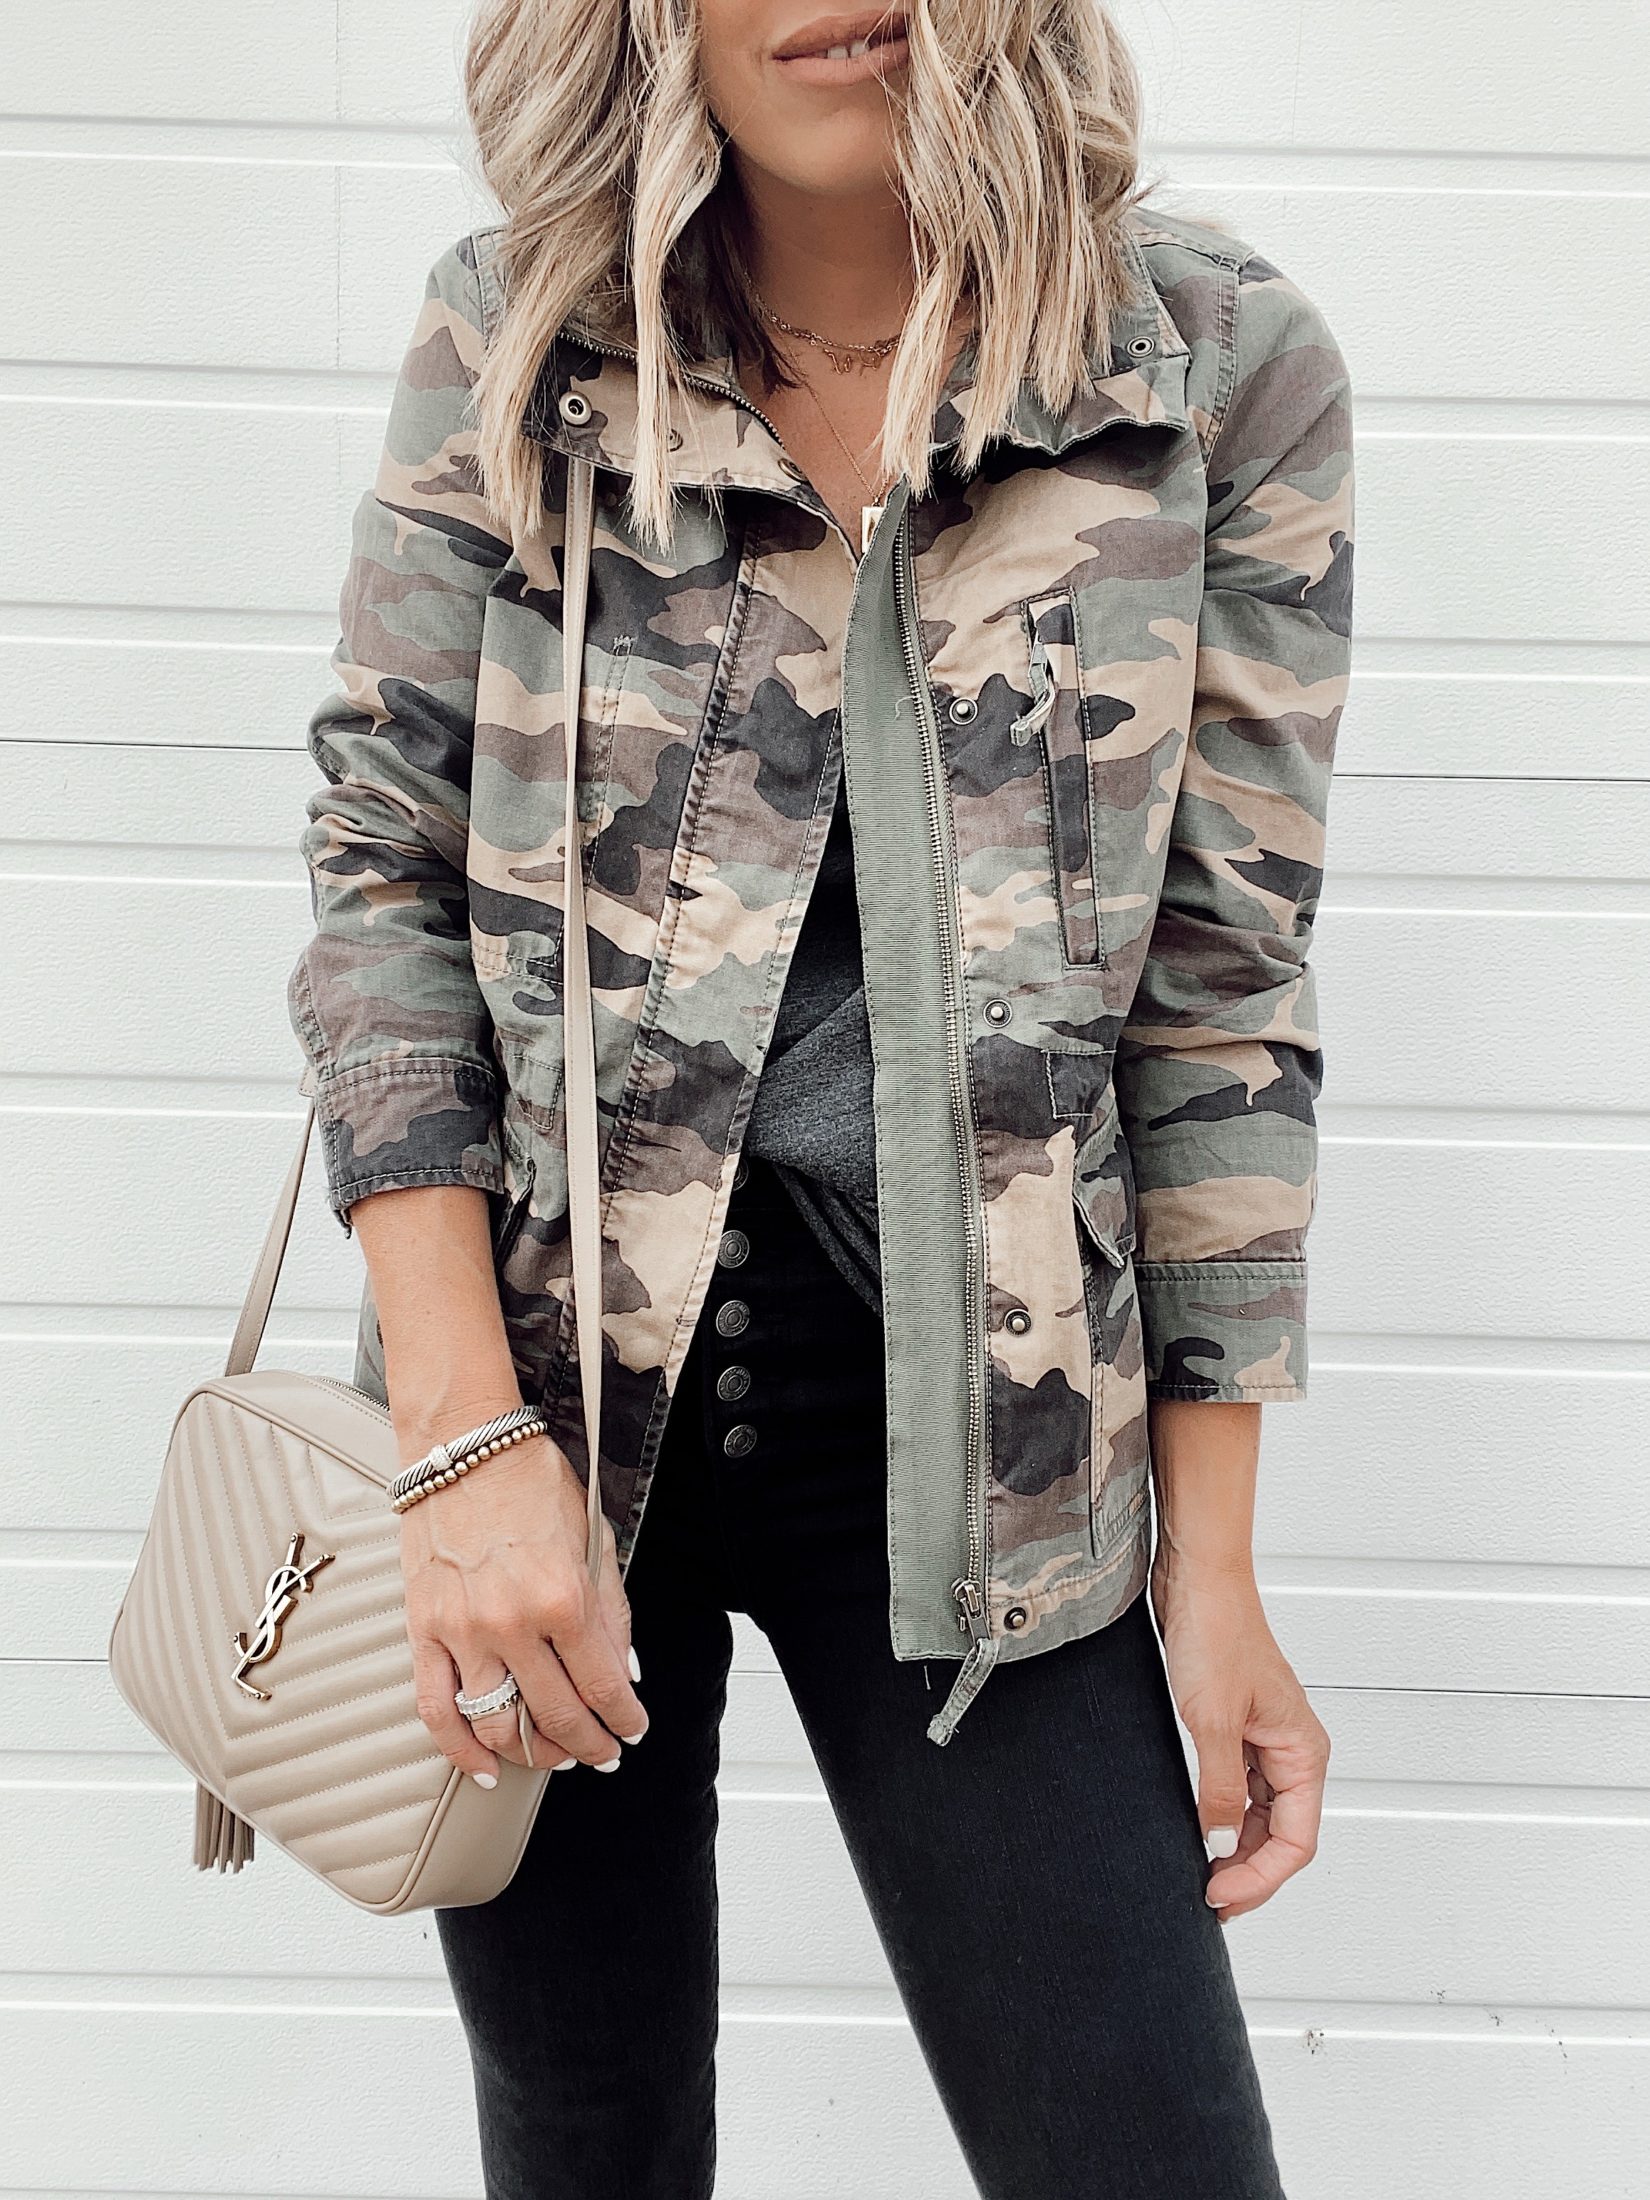 jaime shrayber wearing madewell dispatch camo jacket from nordstrom anniversary sale 2020